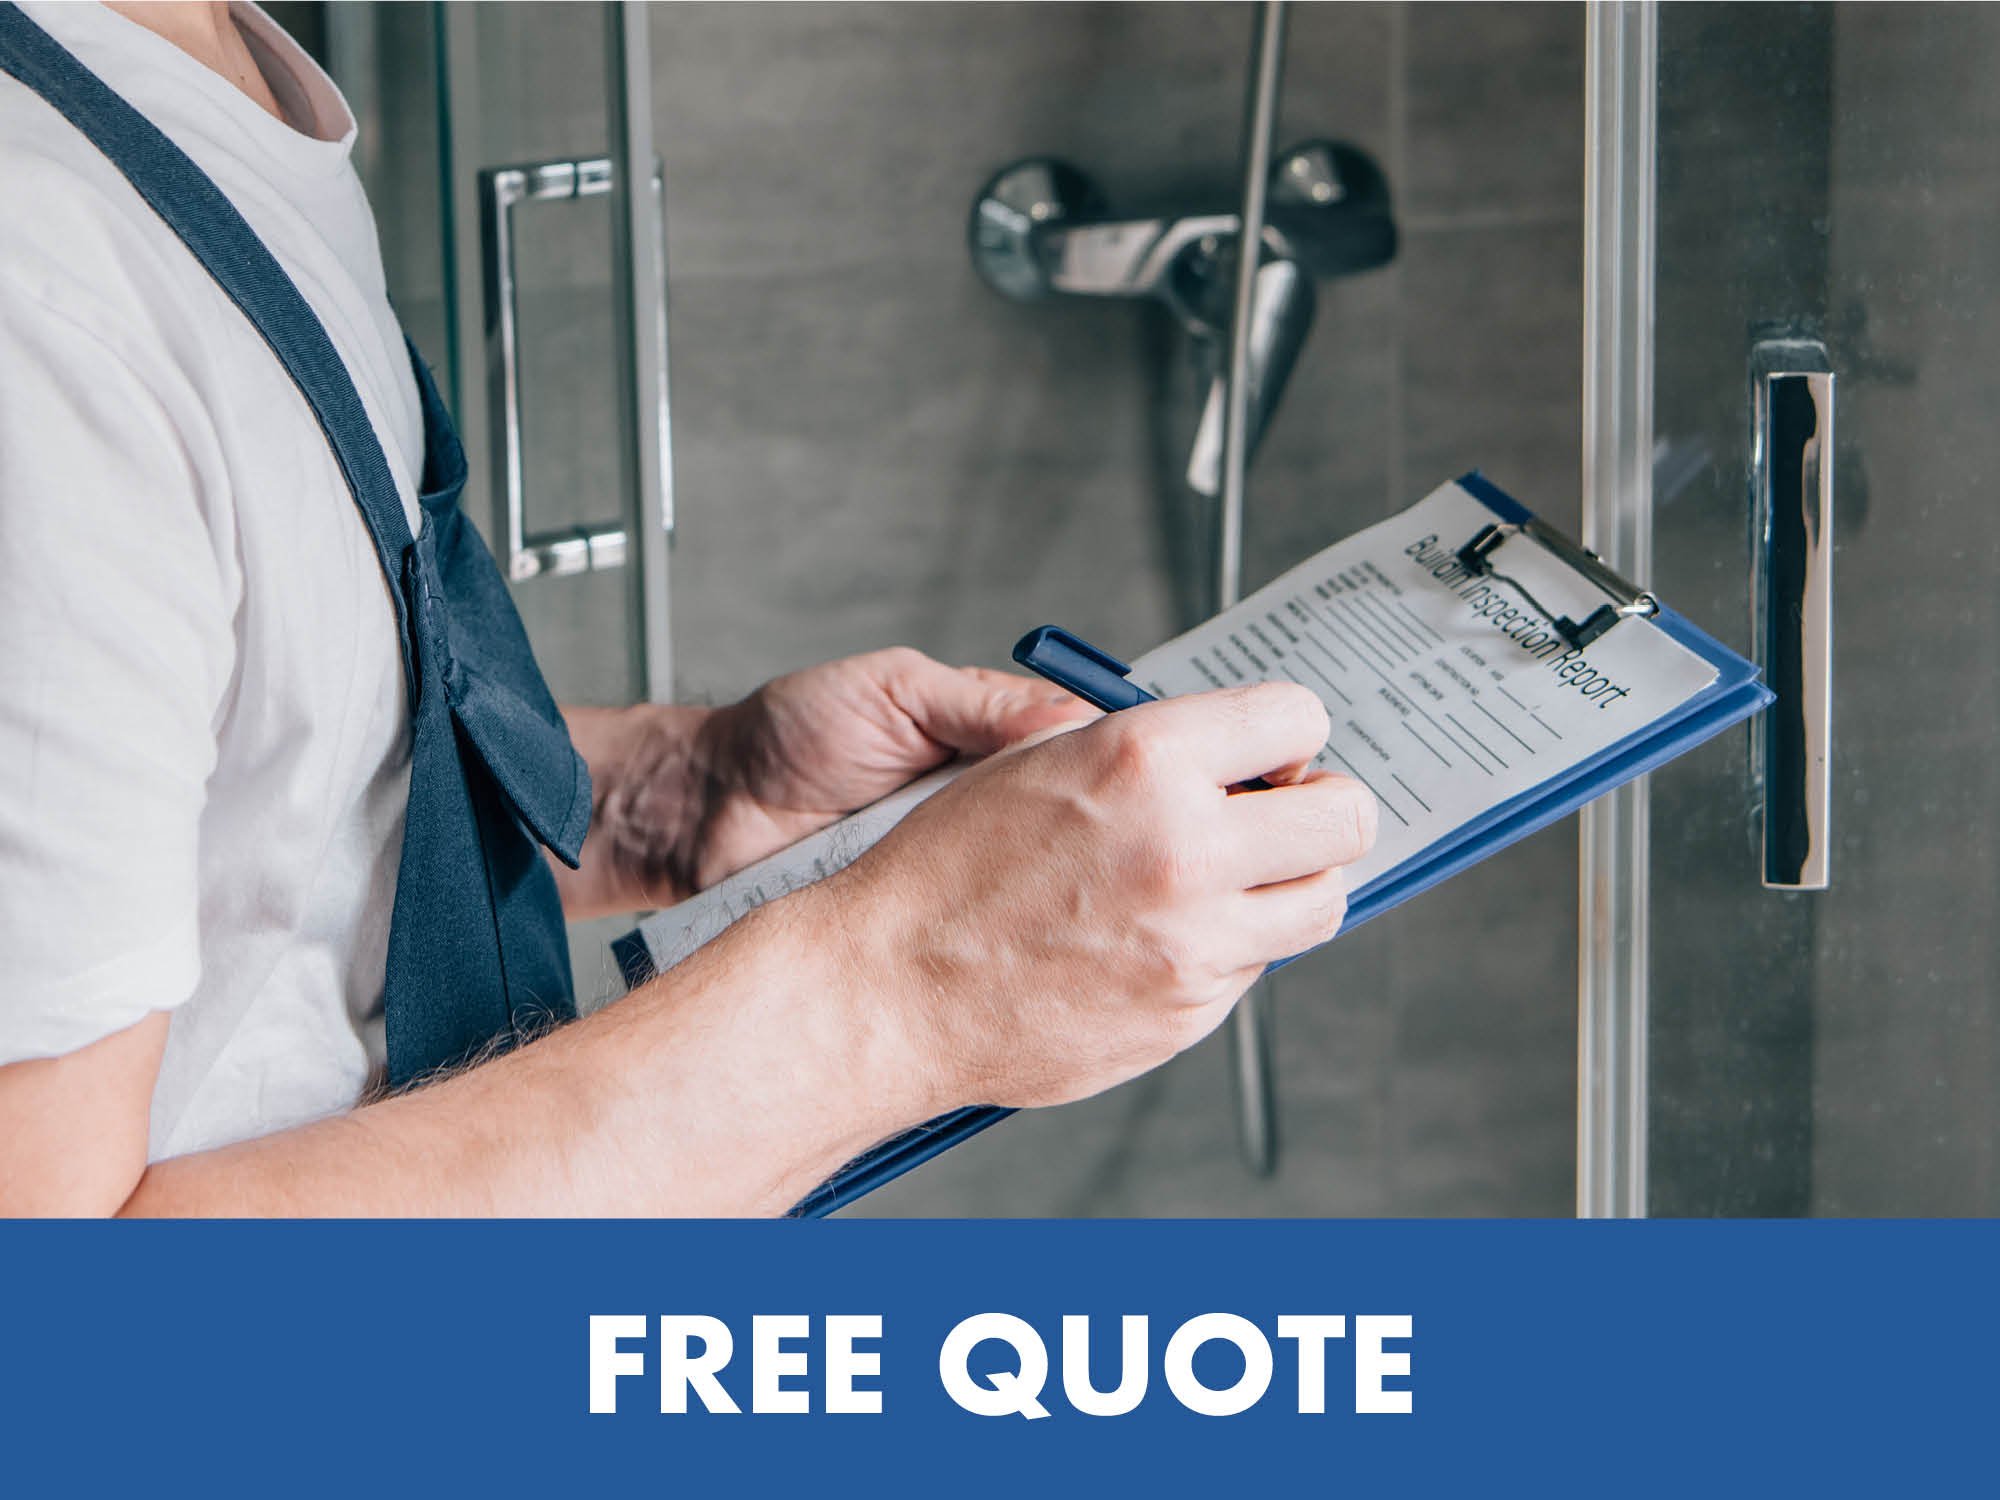 Speak to us for a free, no obligation quote.